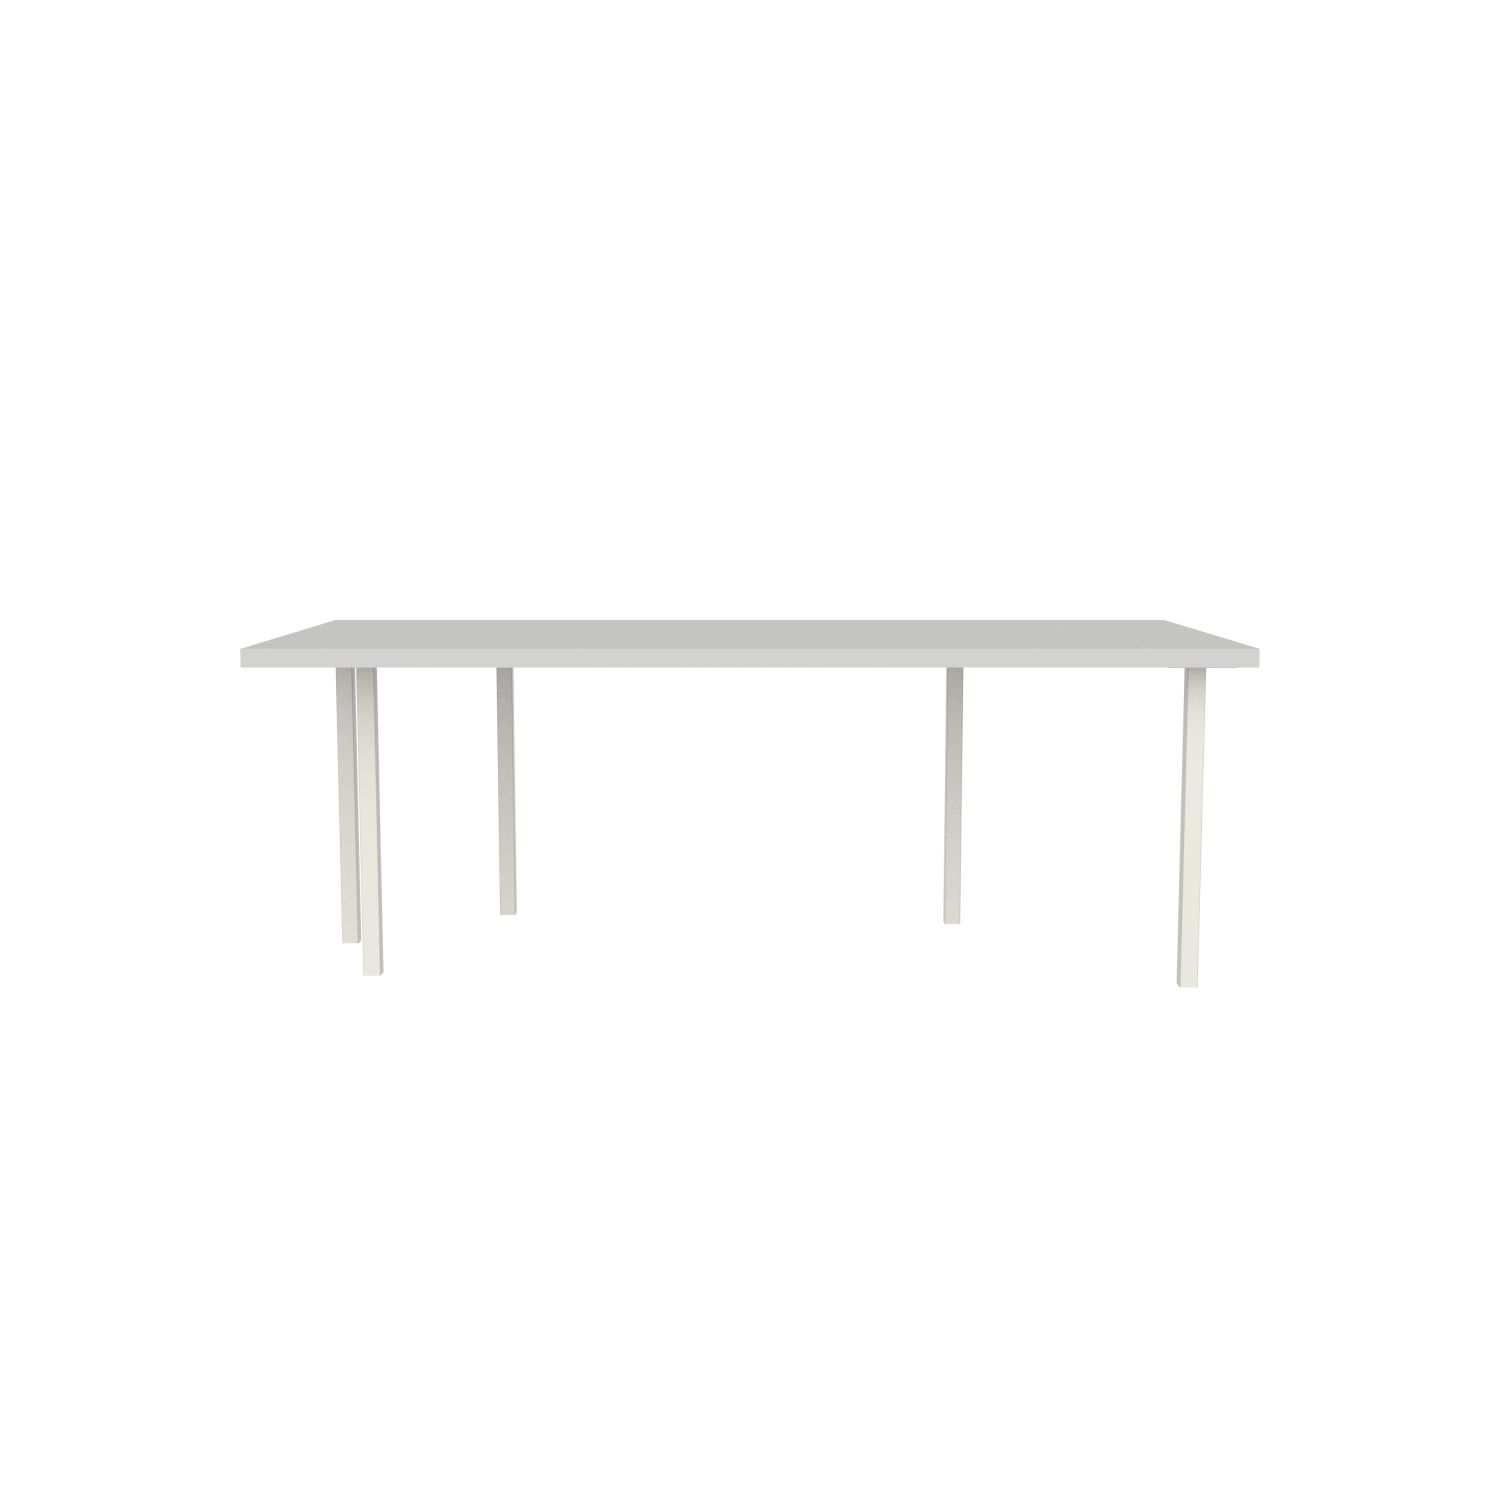 lensvelt bbrand table five fixed heigt 103x218 hpl boring grey 50 mm price level 1 white ral9010